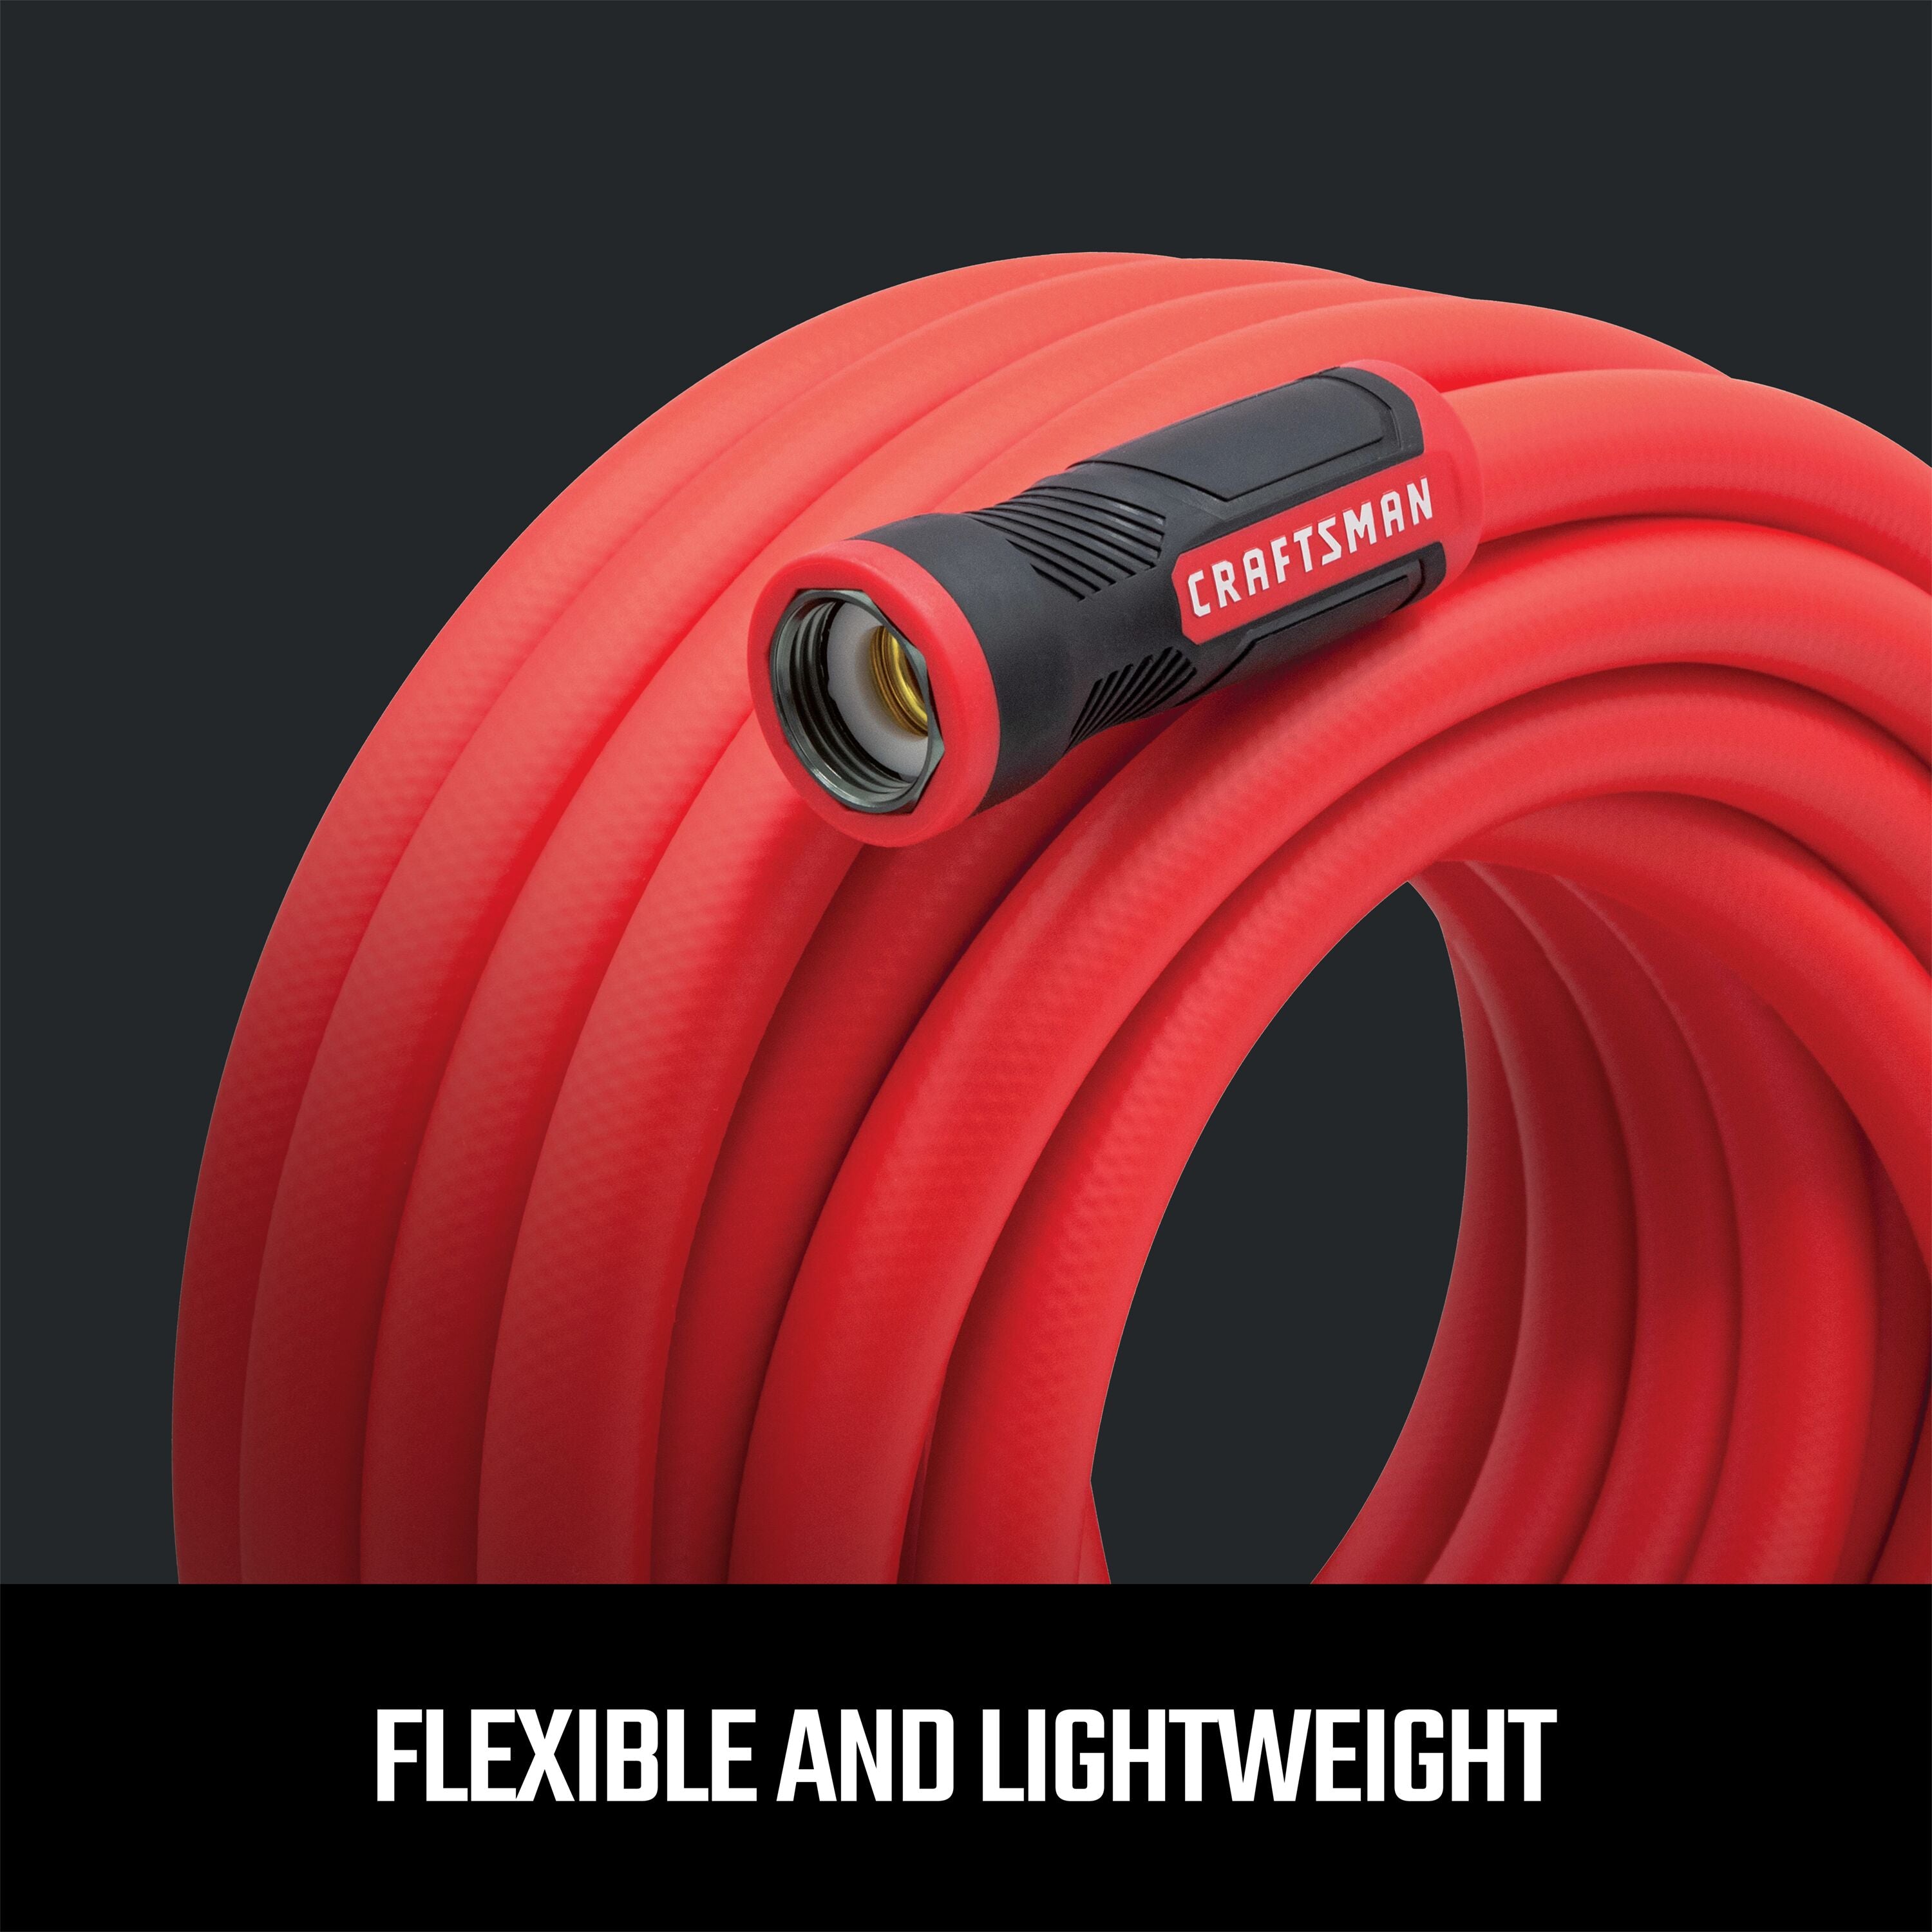 Upright coiled craftsman 75-foot by 5/8 inch professional-grade hot water hose with flexibility and lightweight features graphic